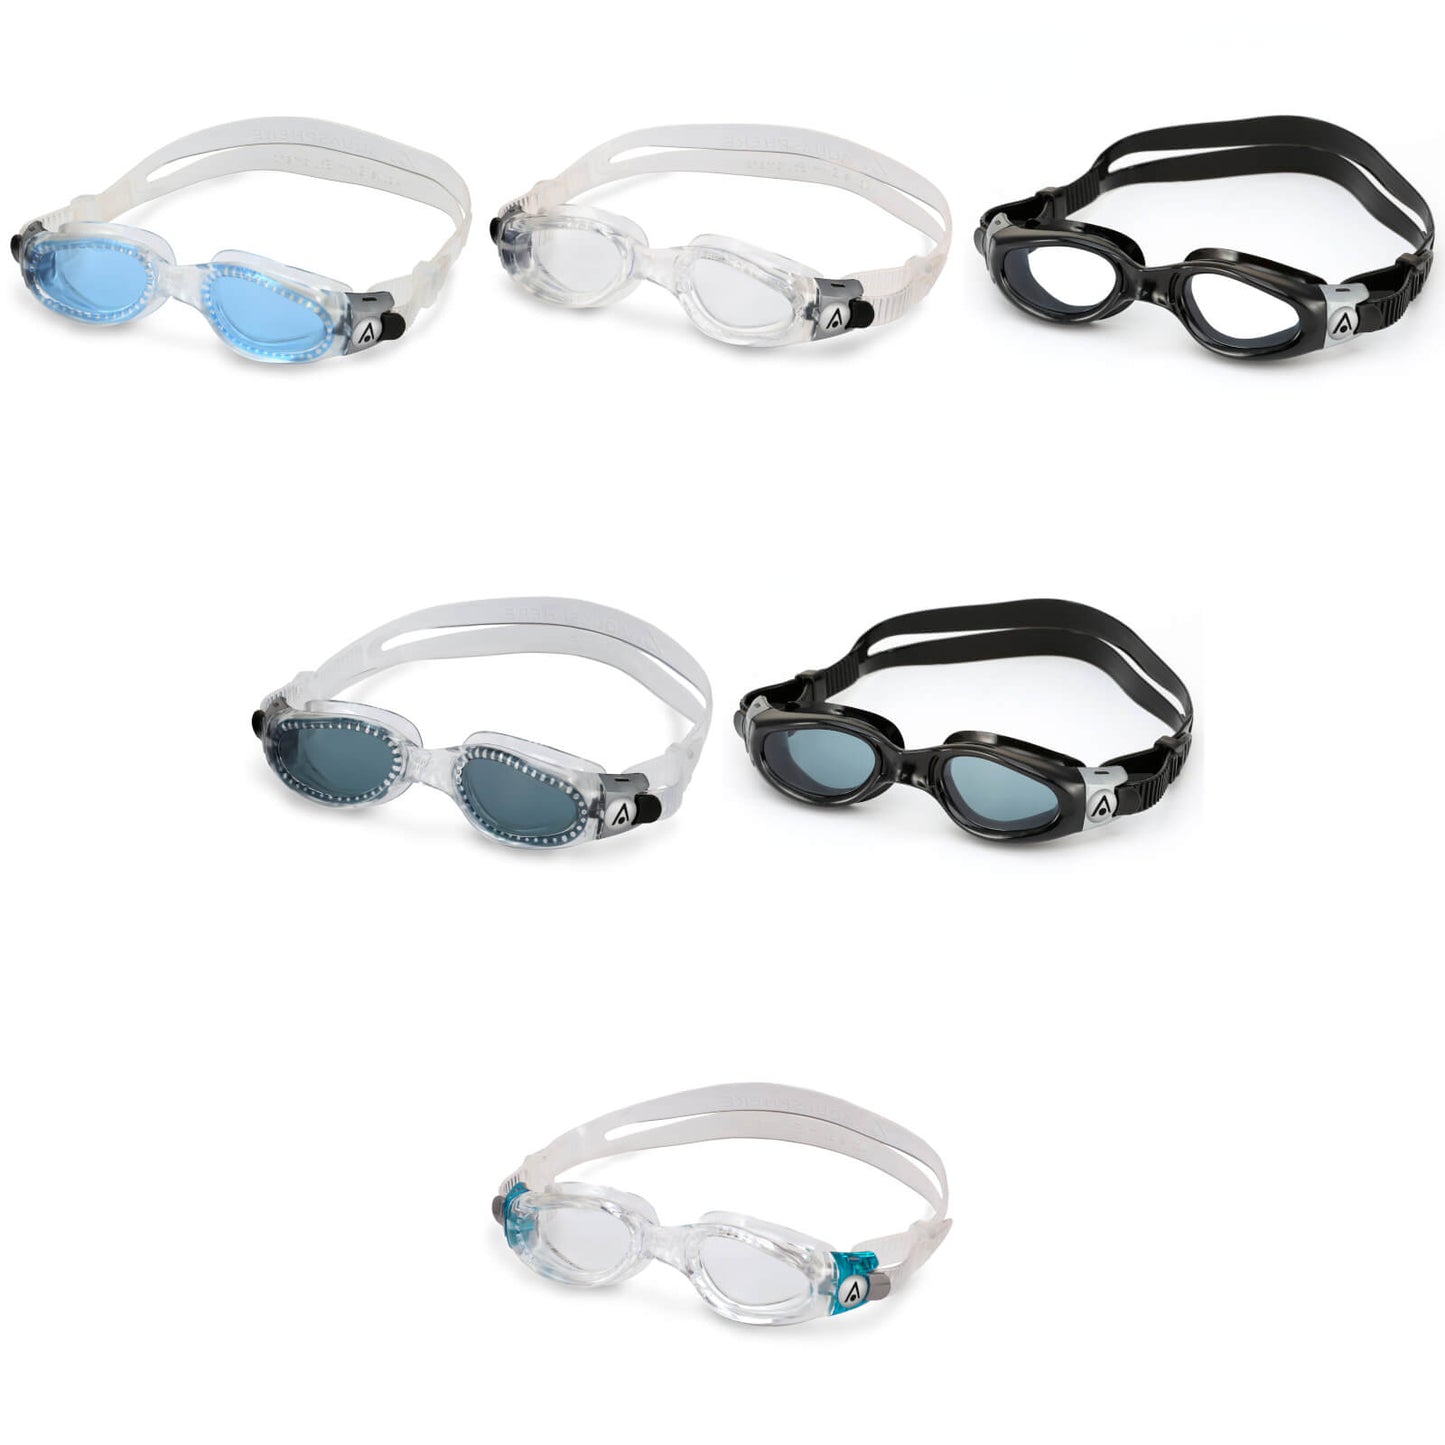 Aqua Sphere Kayenne Compact Adult Triathlon Open Water Men's Swimming Goggles  Collection